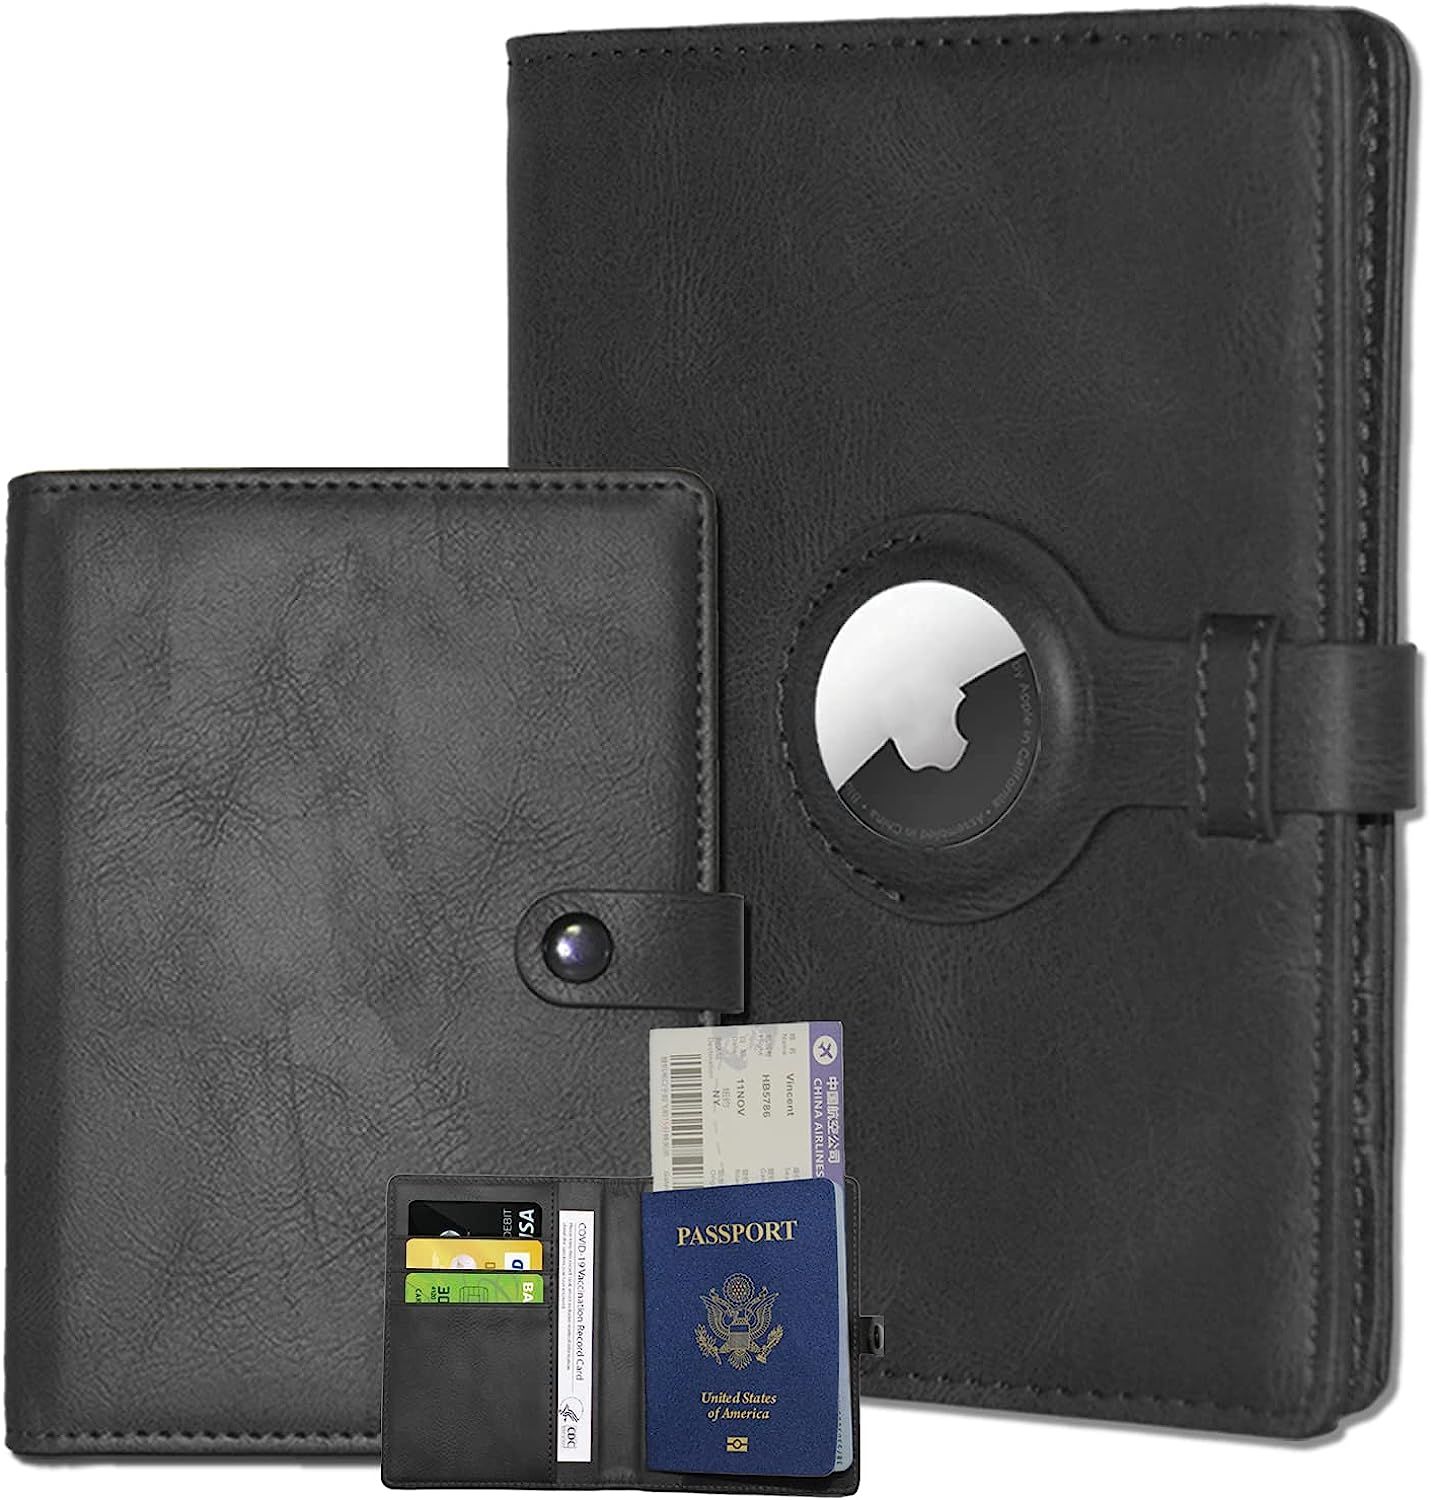 HOORINB Travel Passport Wallet for Women Men with Airtag Holder, RFID Passport and Vaccine Card Hold | Amazon (US)